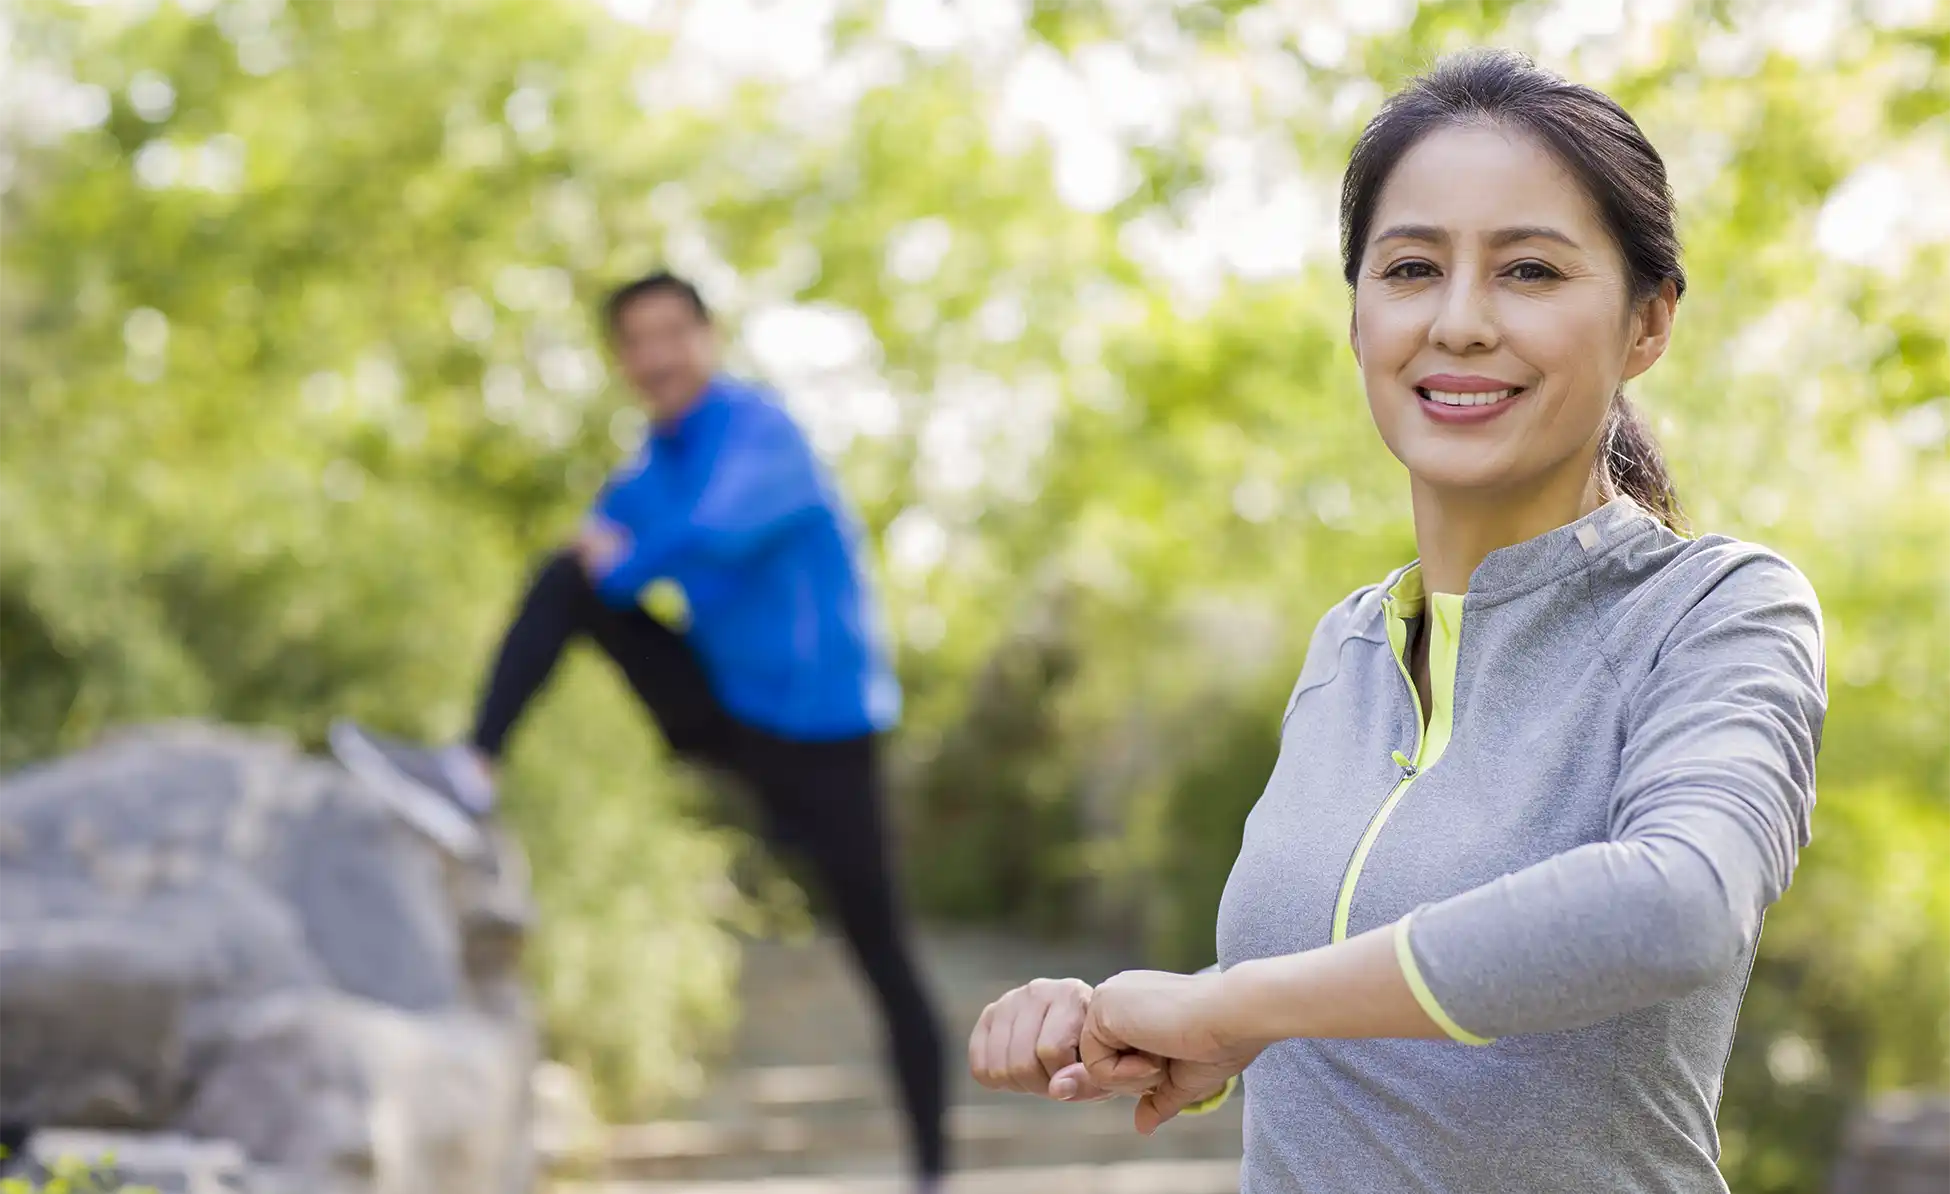 Exercise and Oestrogen